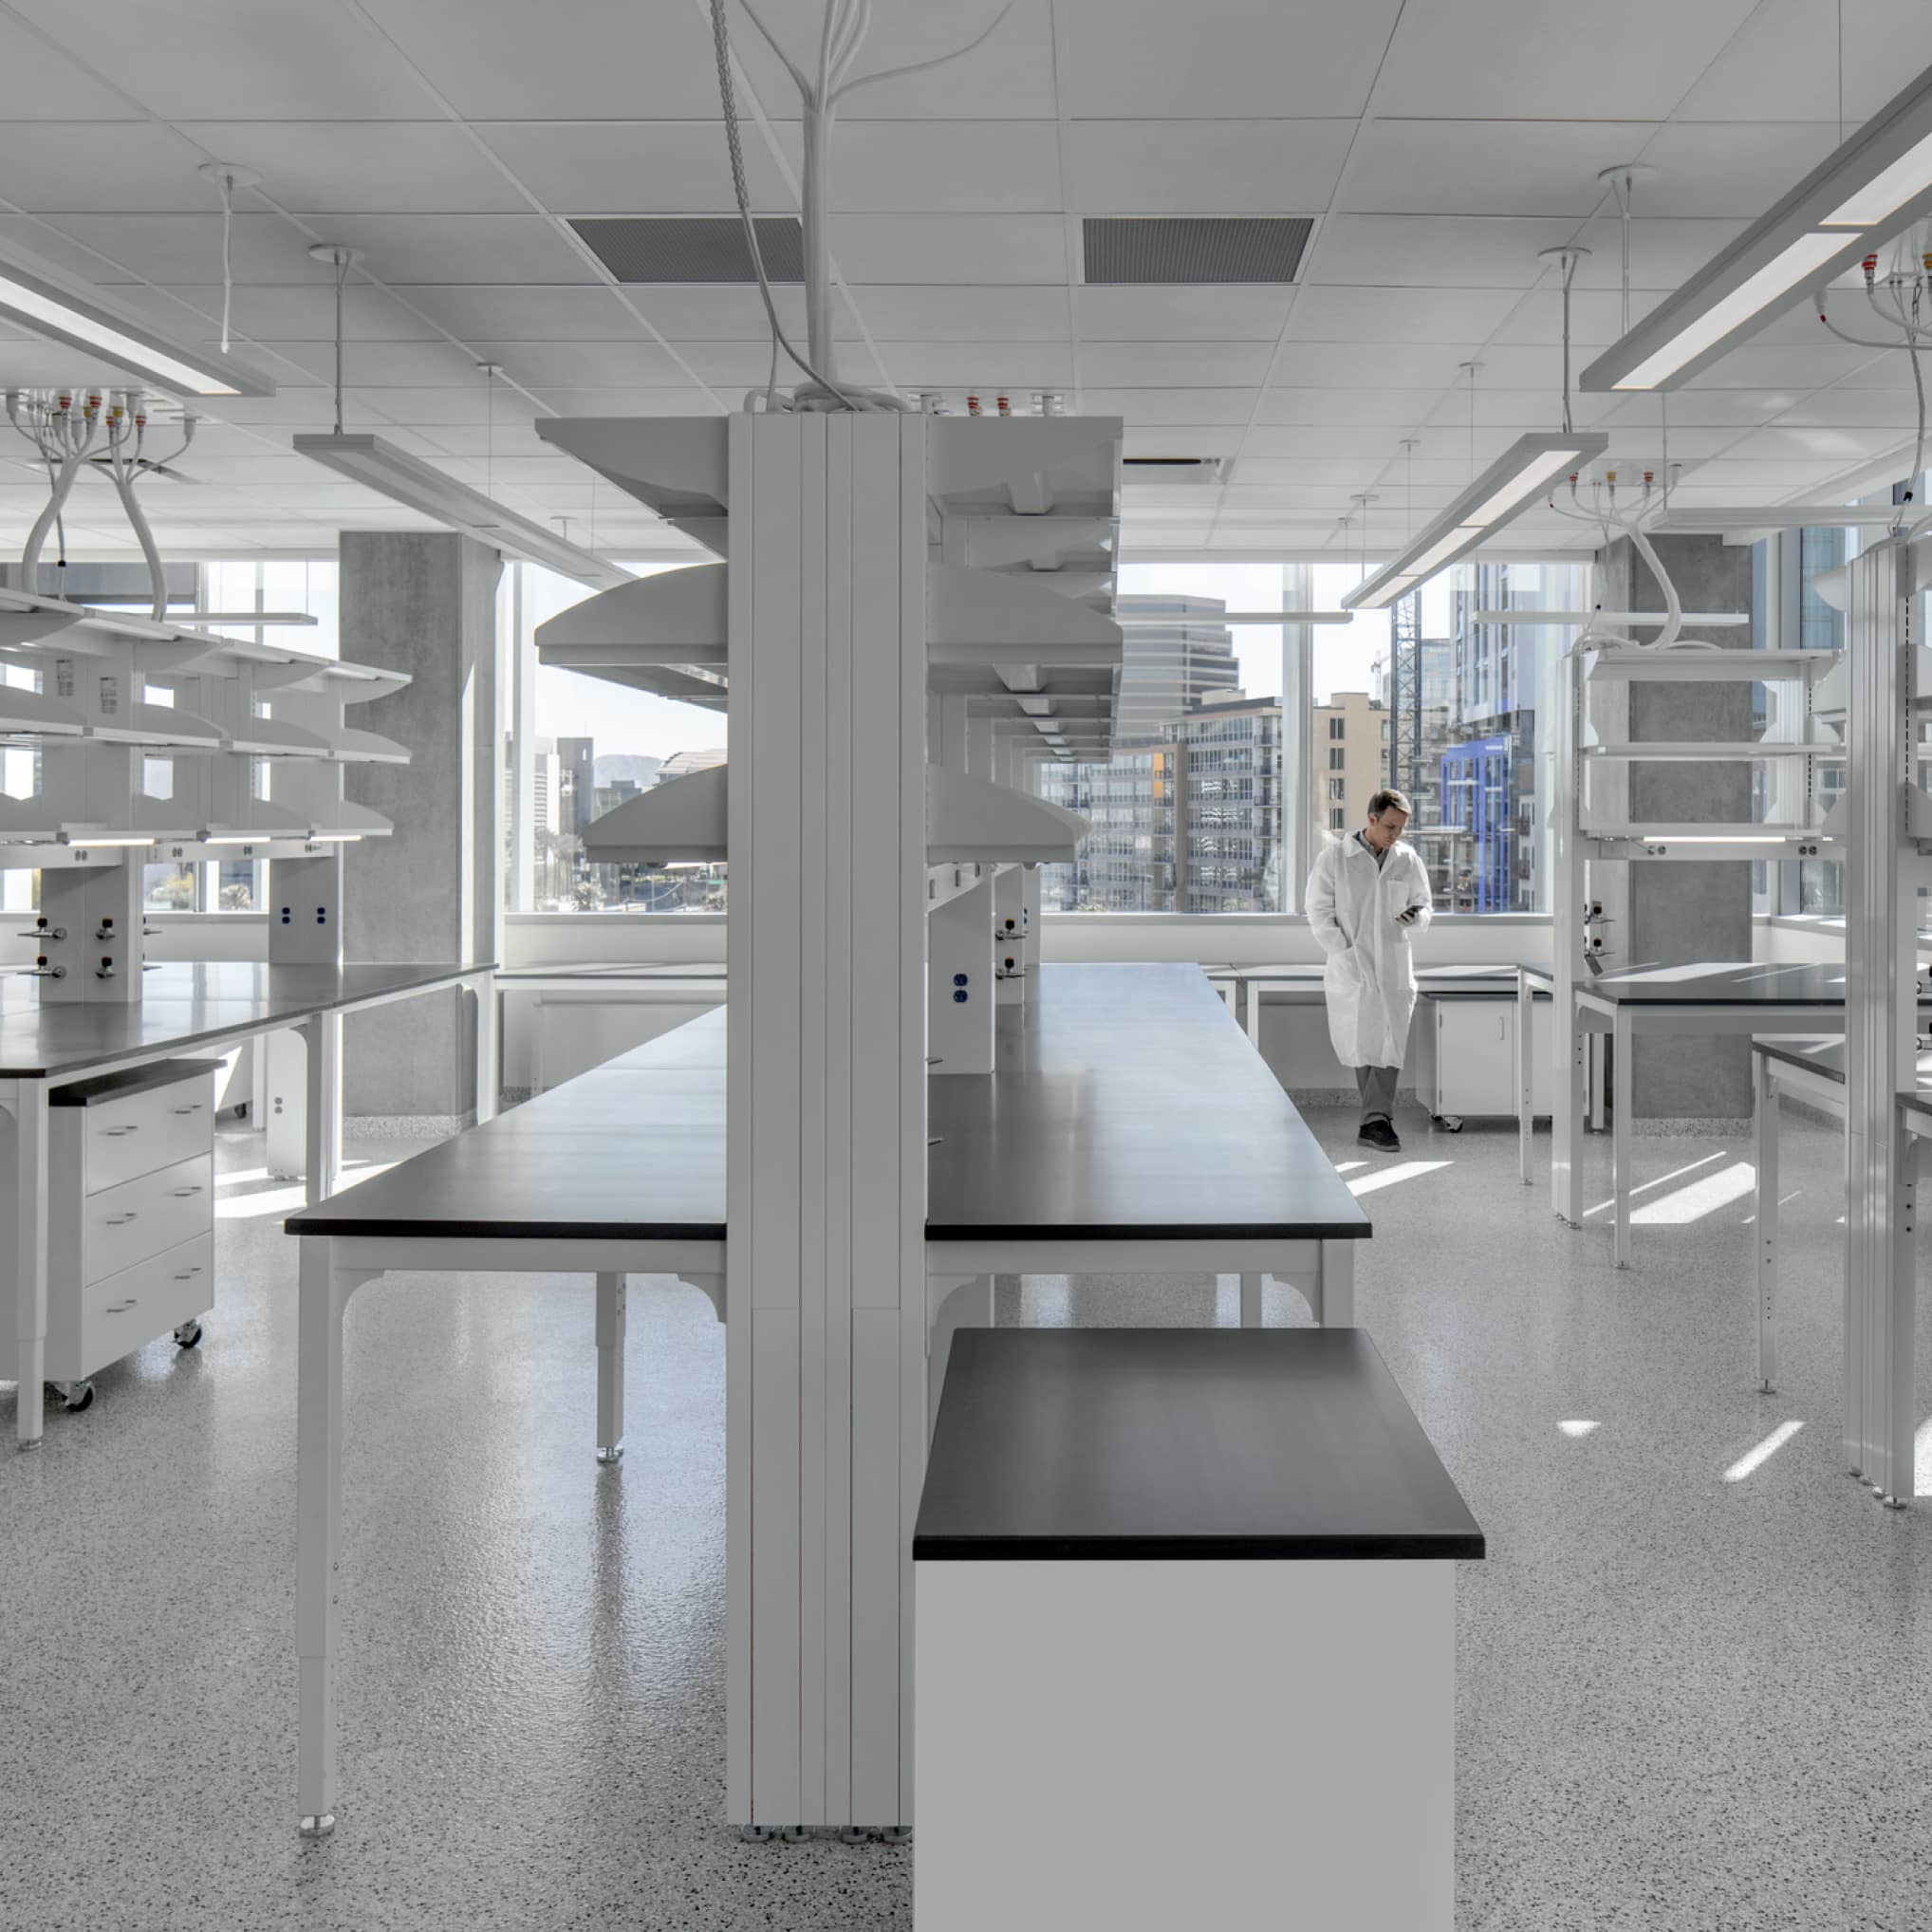 What to Consider When Planning a Speculative Laboratory Conversion